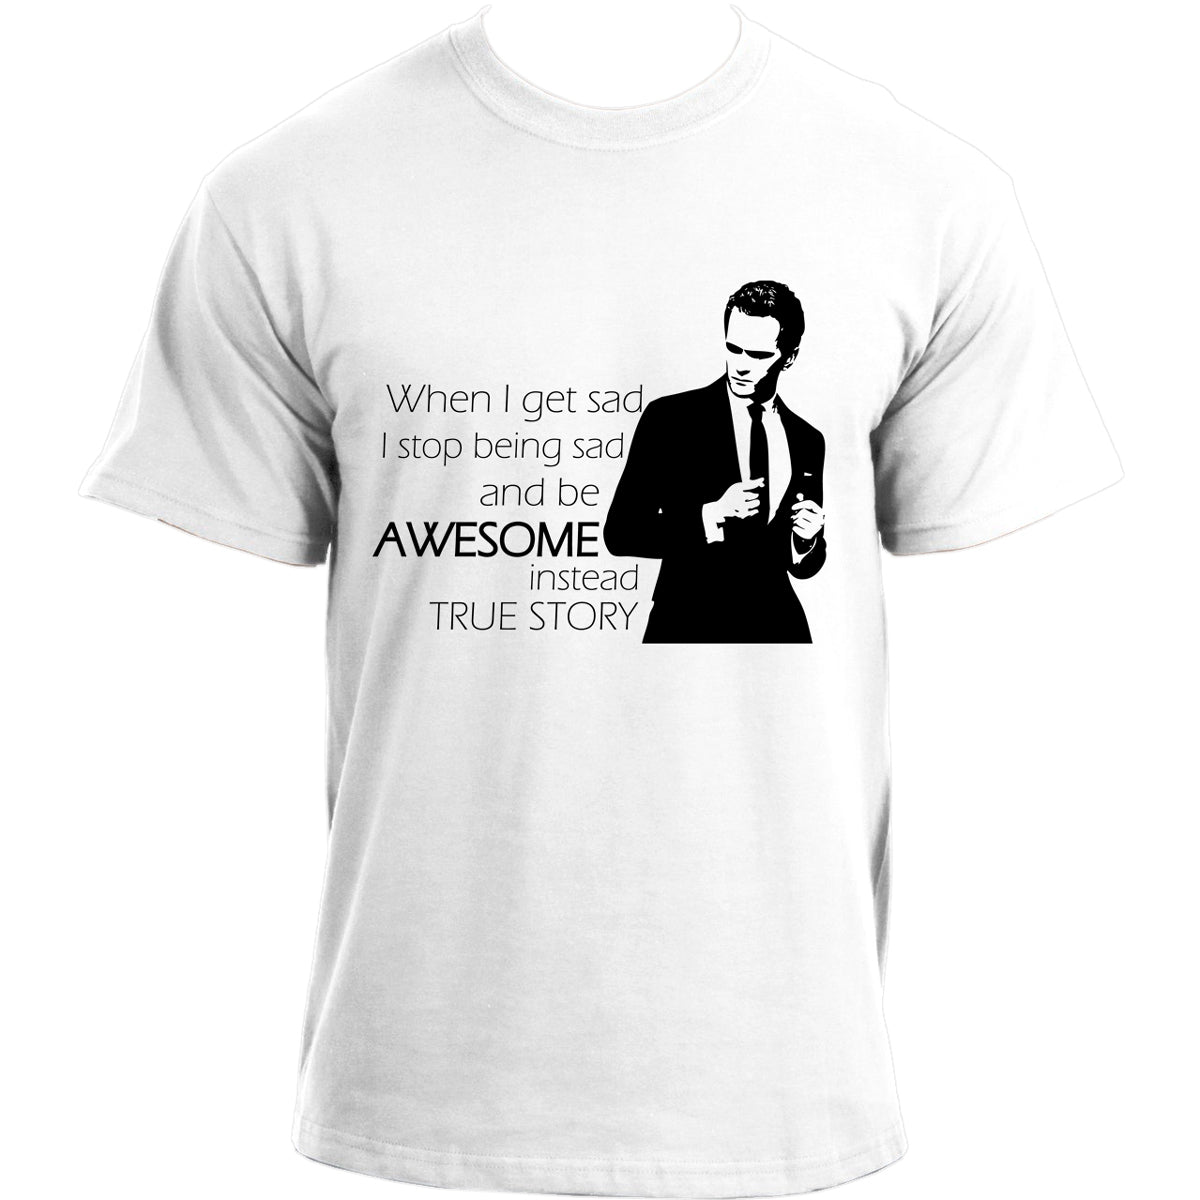 himym Barney Stinson Suit Up Awesome TV Series Inpired Funny T-shirt